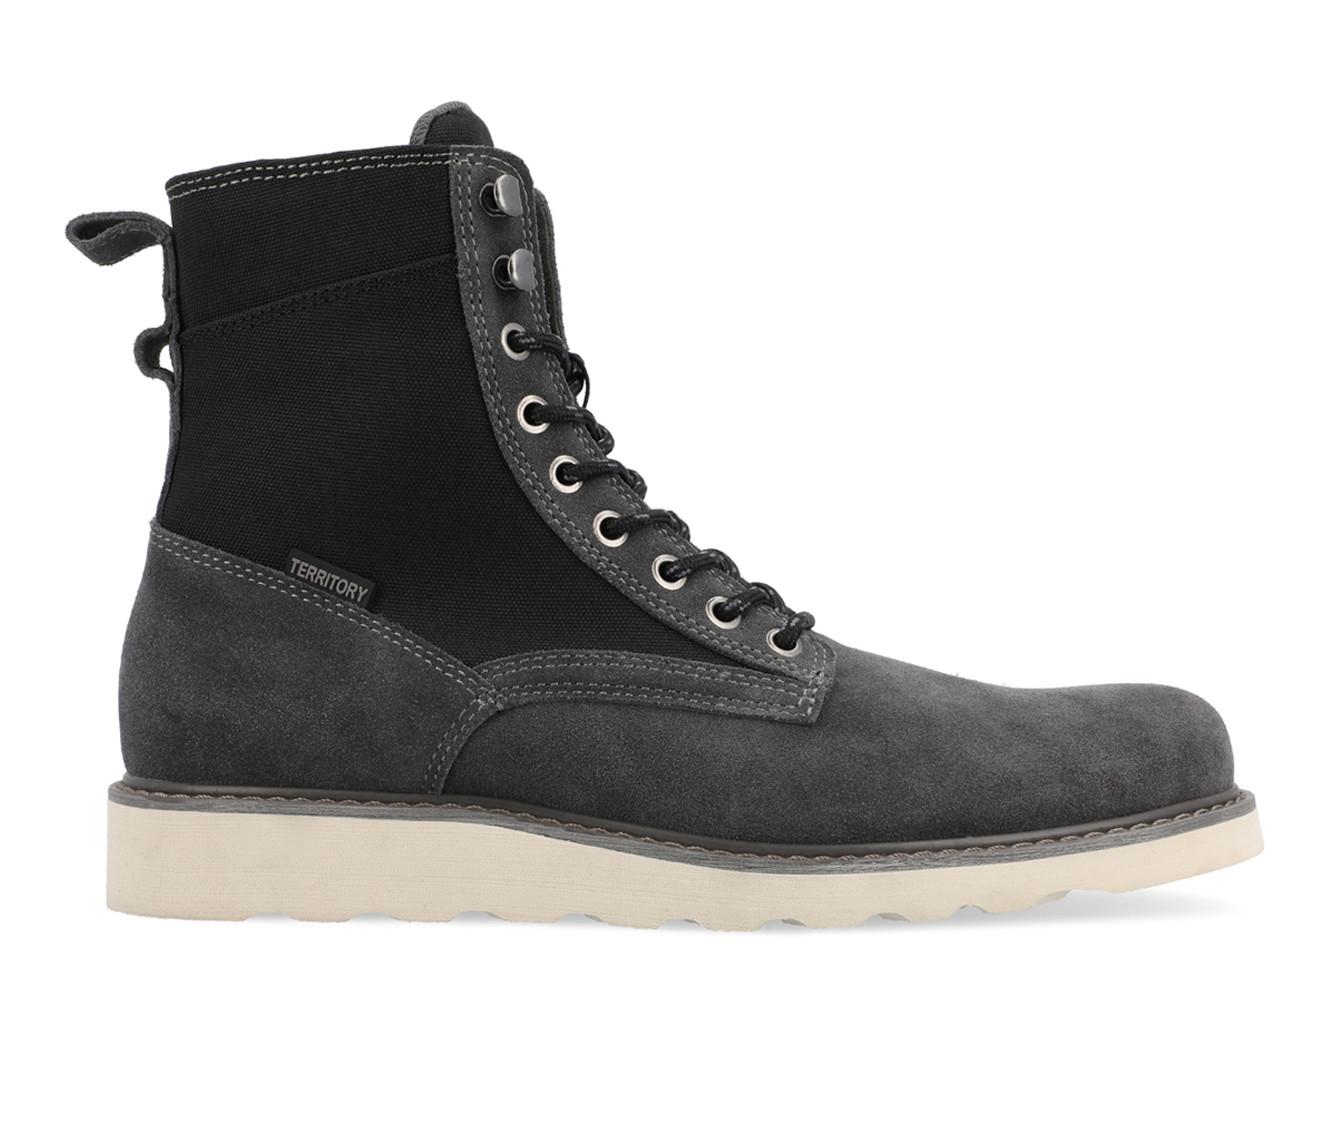 Men's Territory Elevate Lace Up Boots